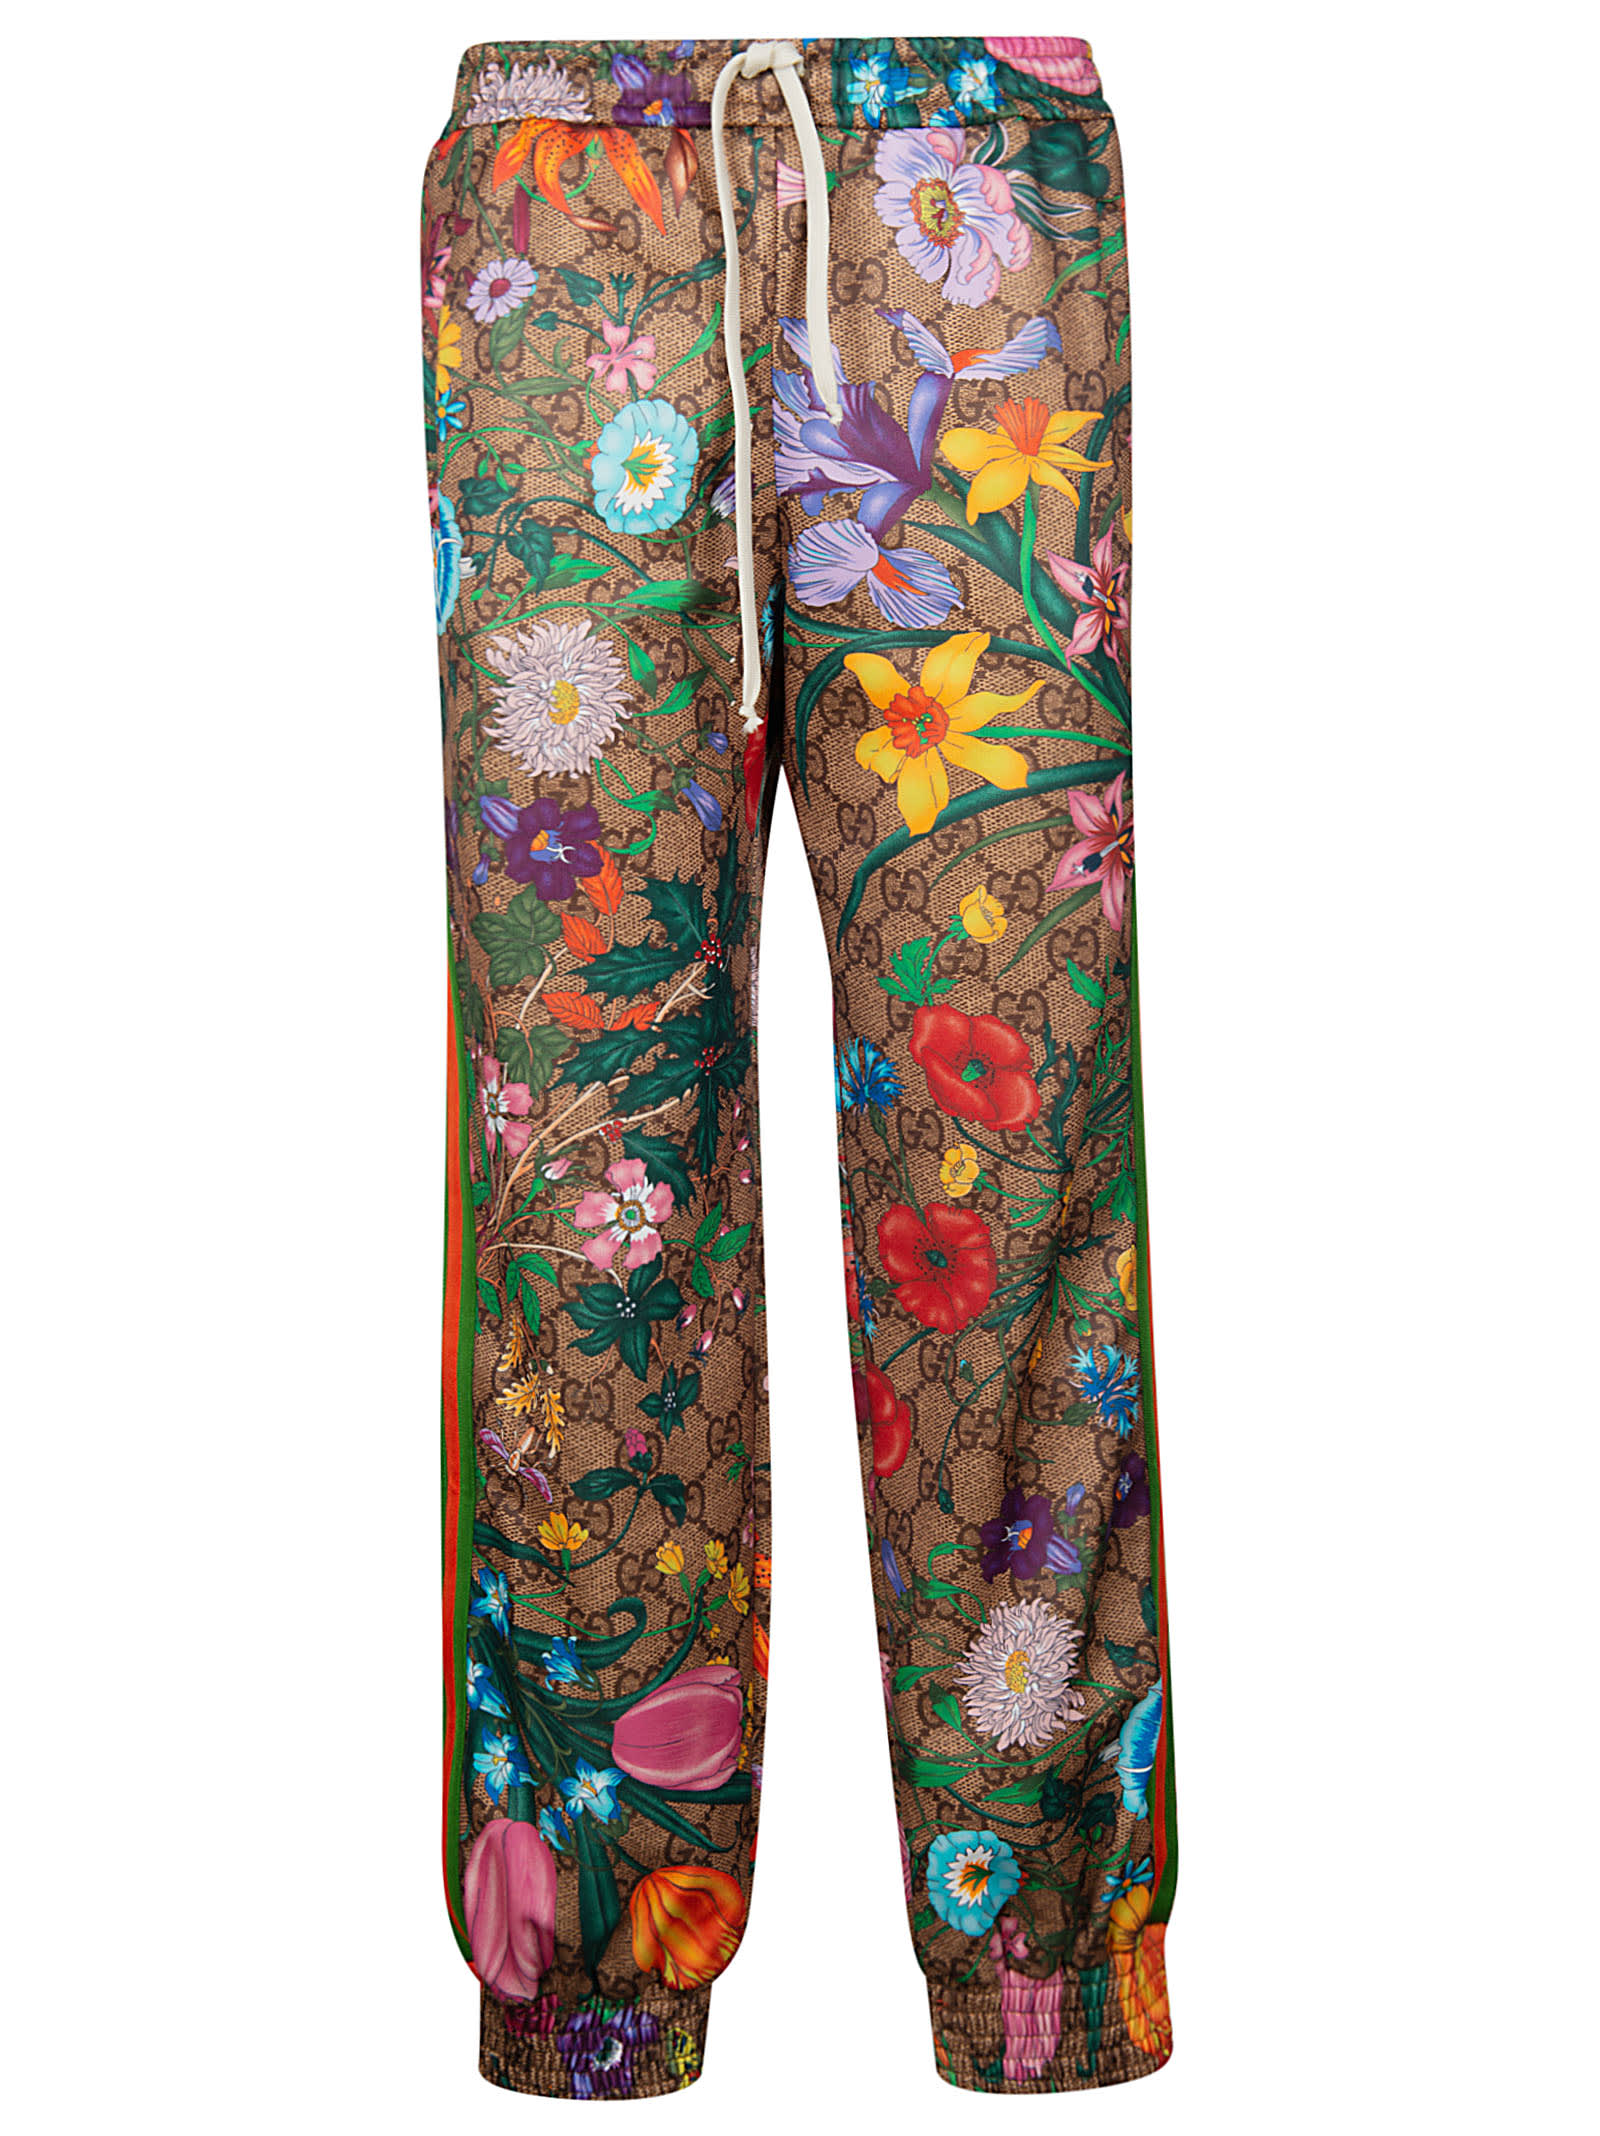 GUCCI FLORAL PRINTED TROUSERS,11247449